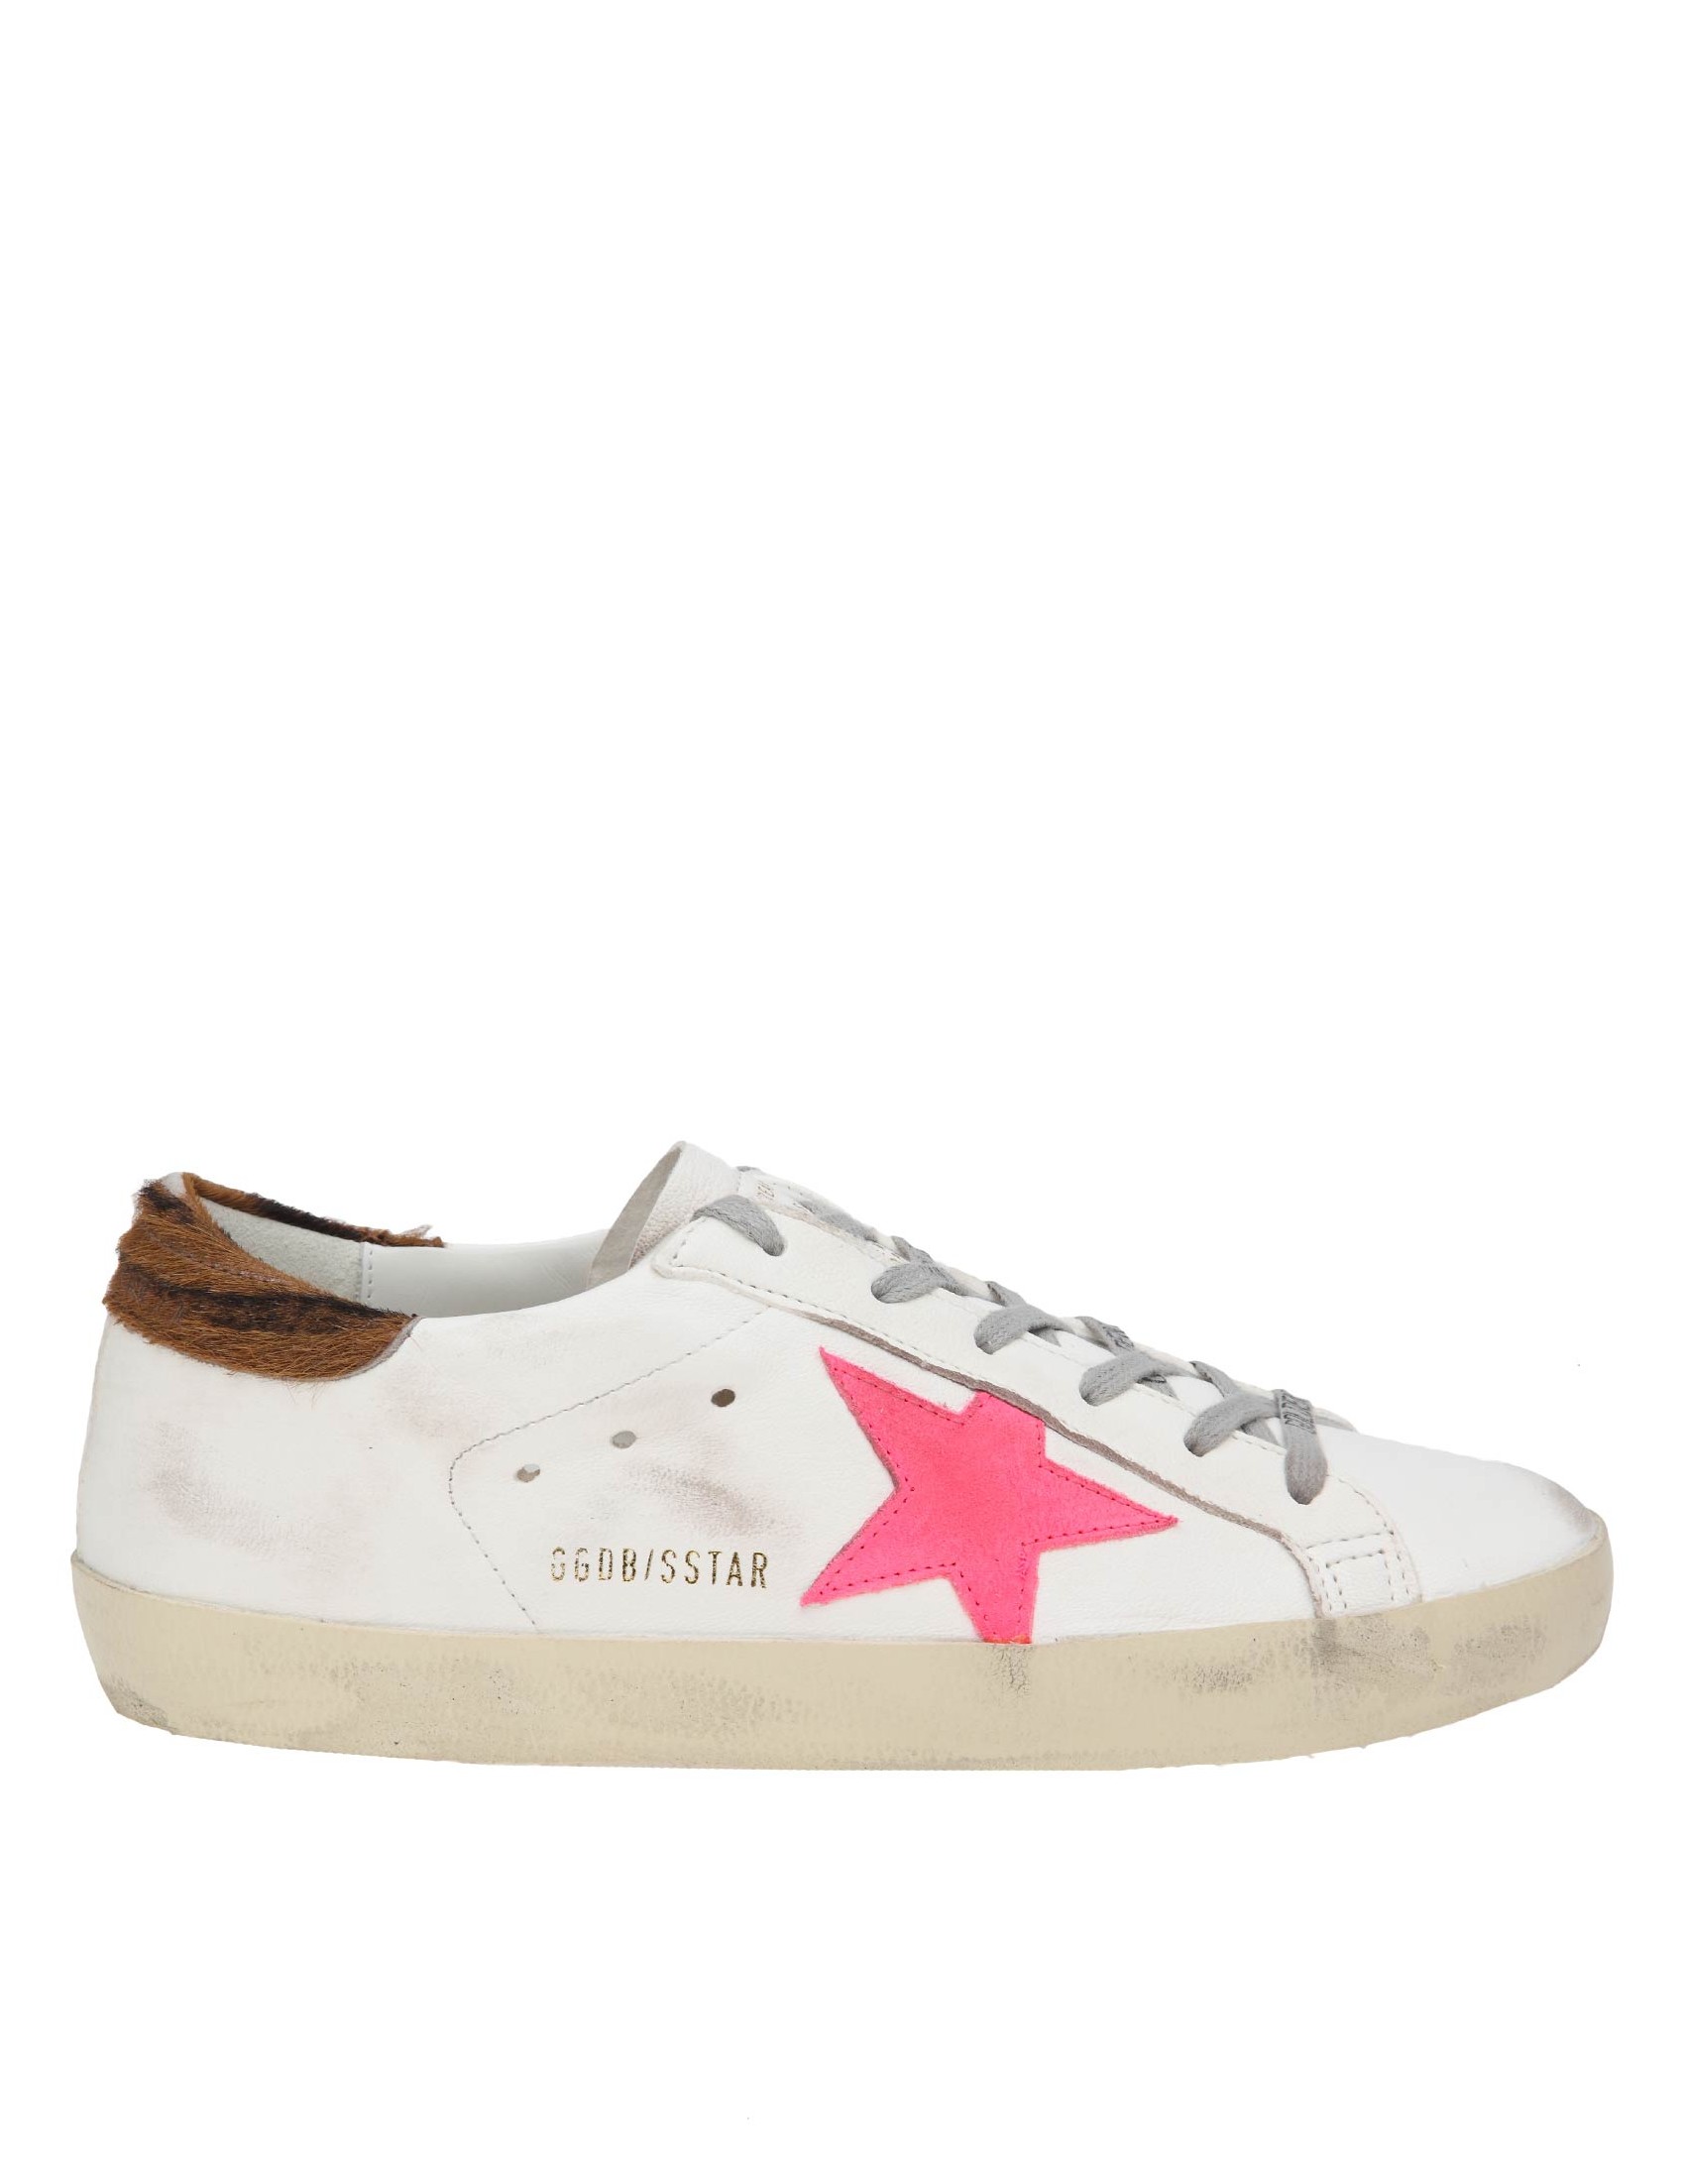 GOLDEN GOOSE SUPER STAR SNEAKERS IN WHITE AND FUCHSIA LEATHER